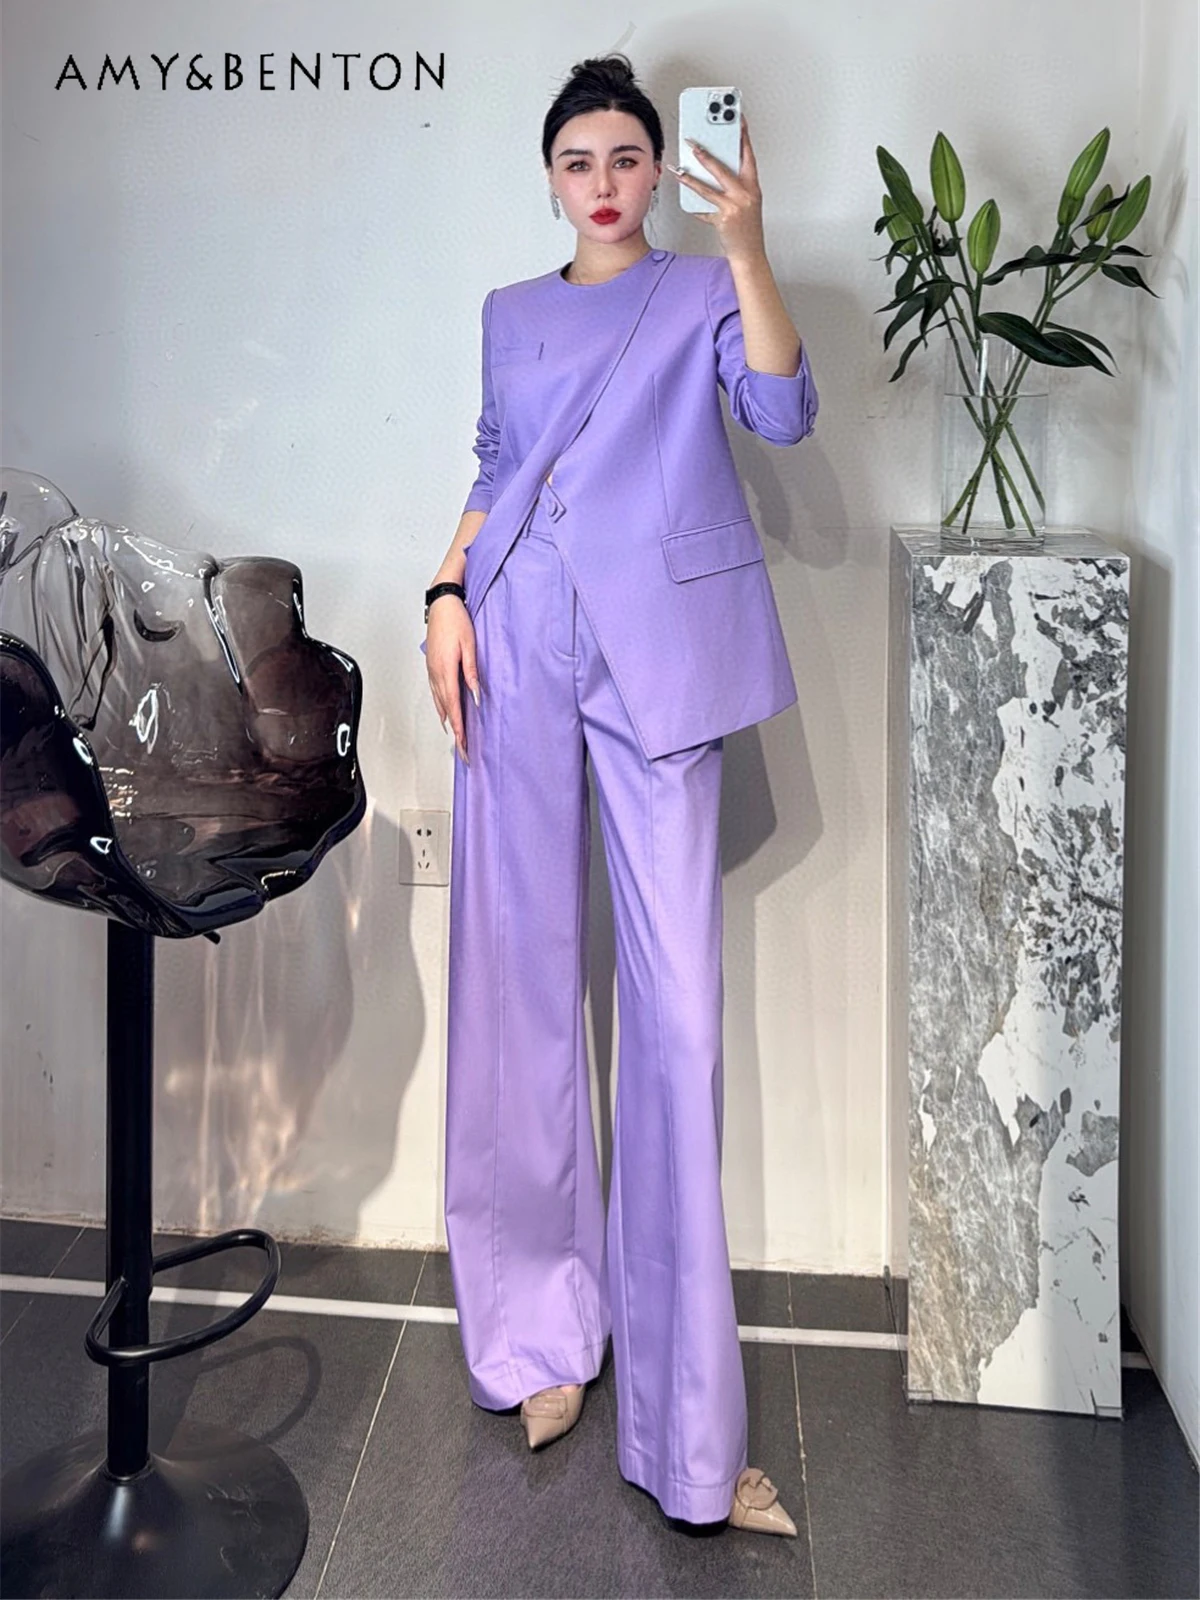 European High-End Fashion Temperament Professional Suit Summer New Commuter Style Suit Jacket Wide Leg Pants Two-Piece Sets customized product、boya professional manufacturing 24k gold plated metal foka amulet to european market